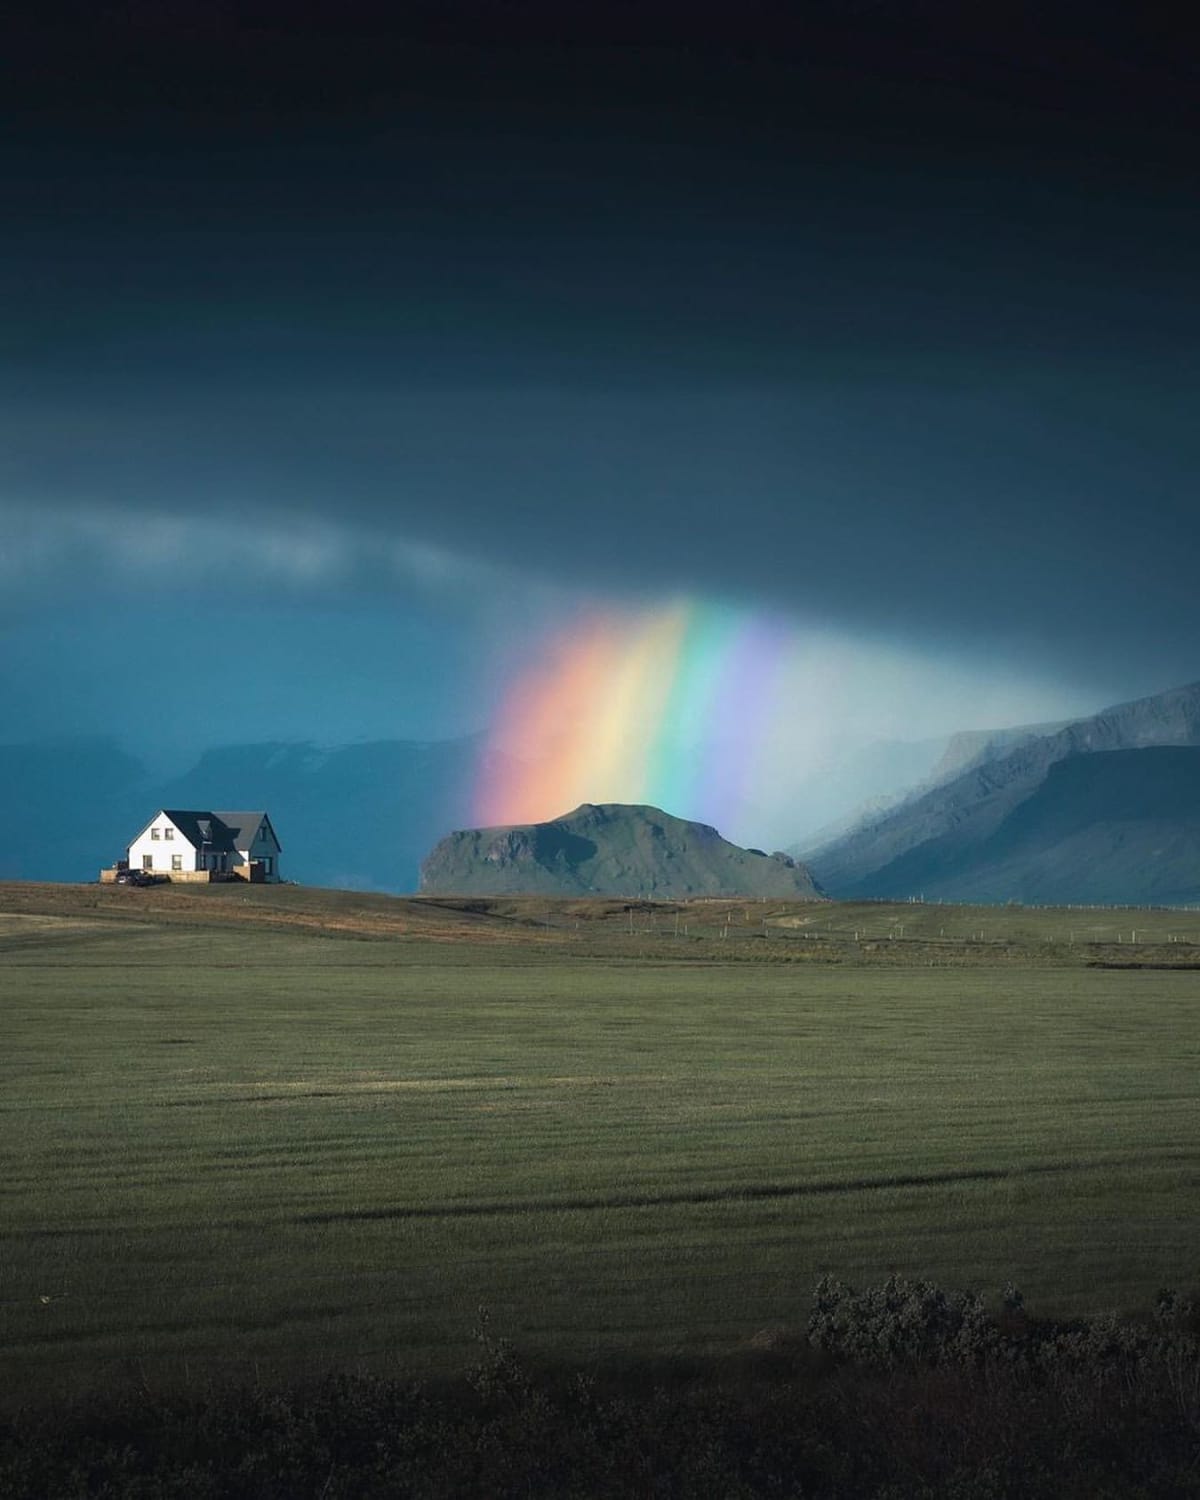 This huge rainbow in Iceland